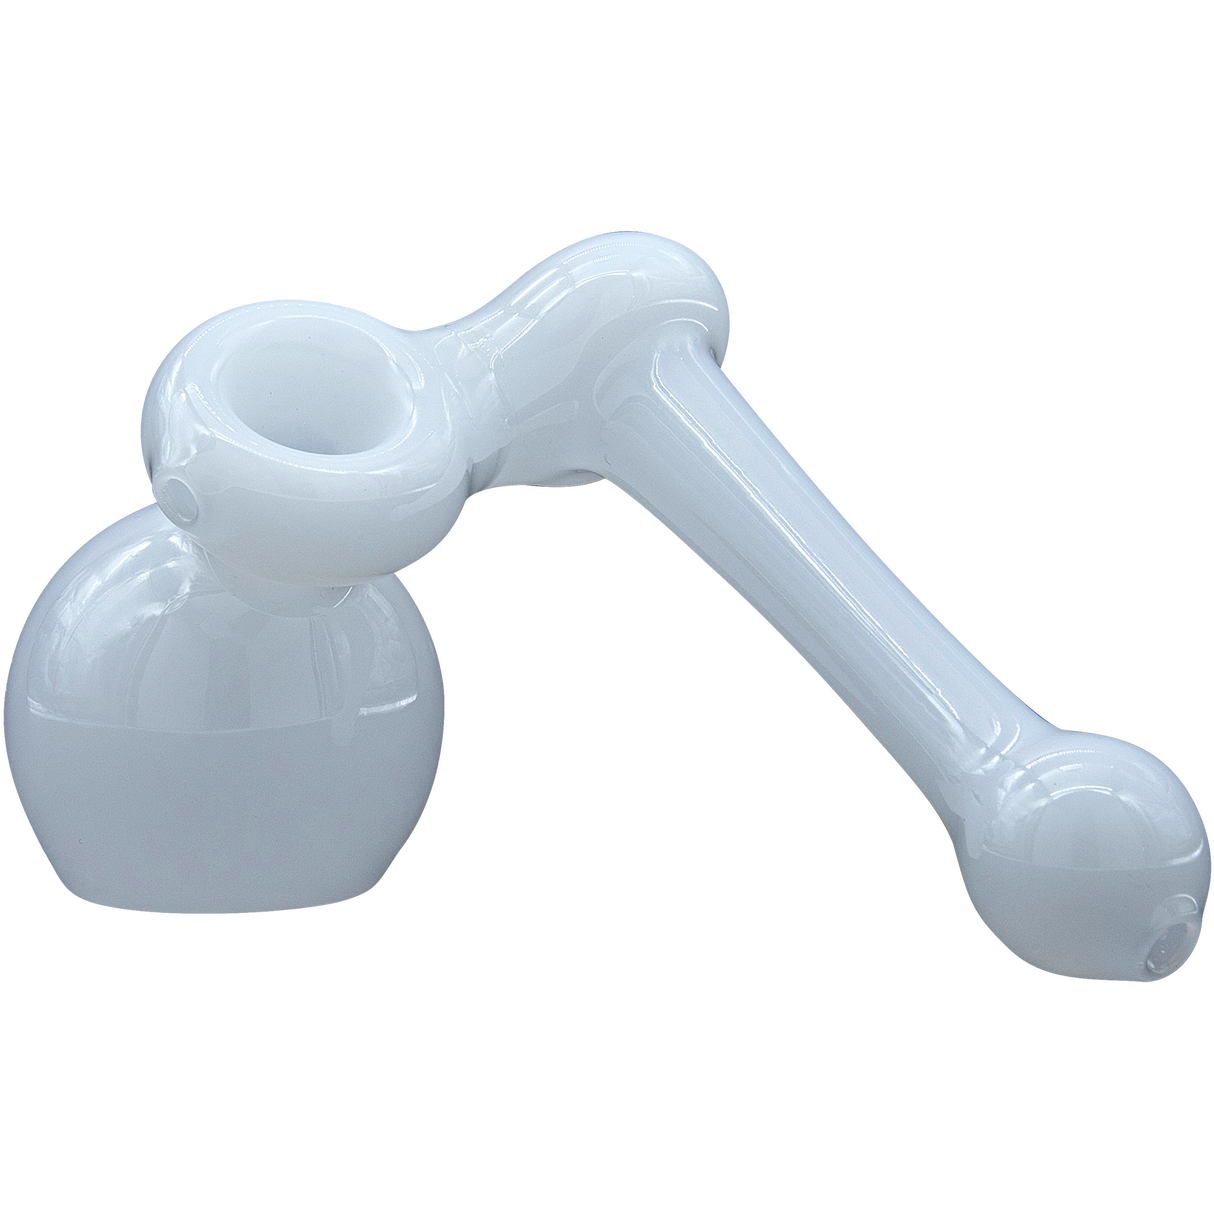 LA Pipes "Ivory Sidecar" Glass Bubbler Pipe for Dry Herbs, 6" Length, USA Made